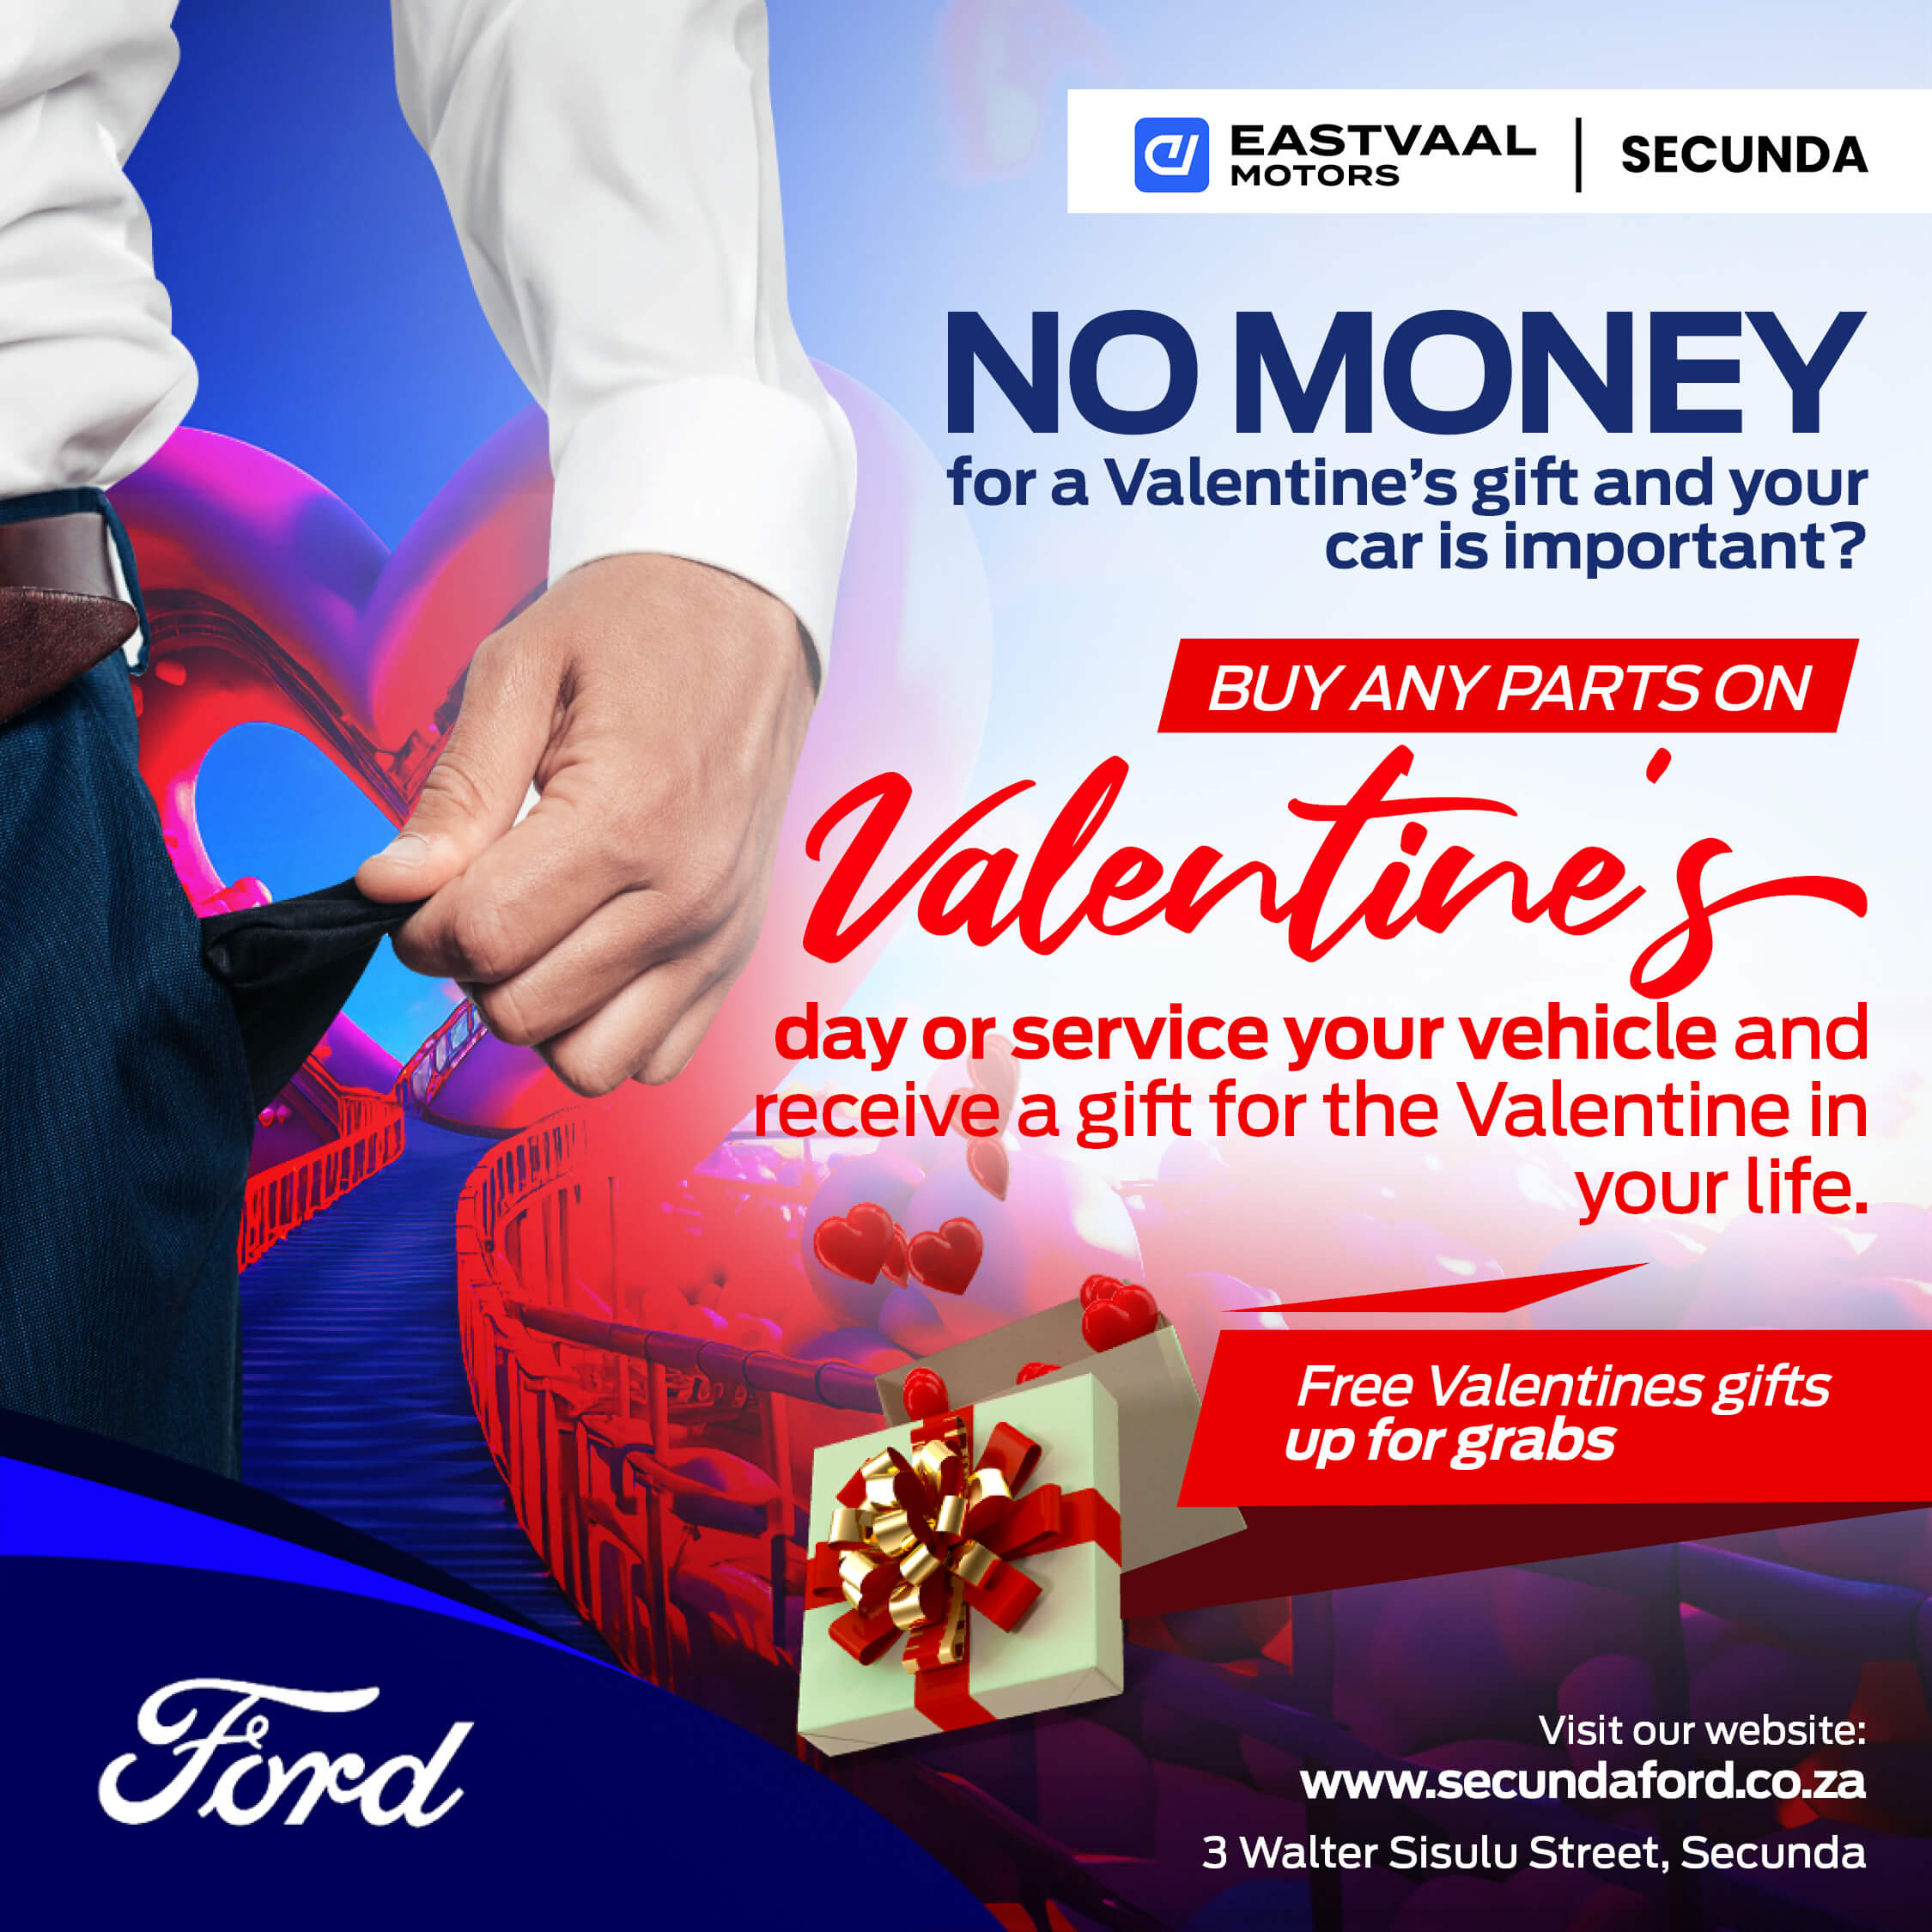 Secunda Ford Valentines Service image from 